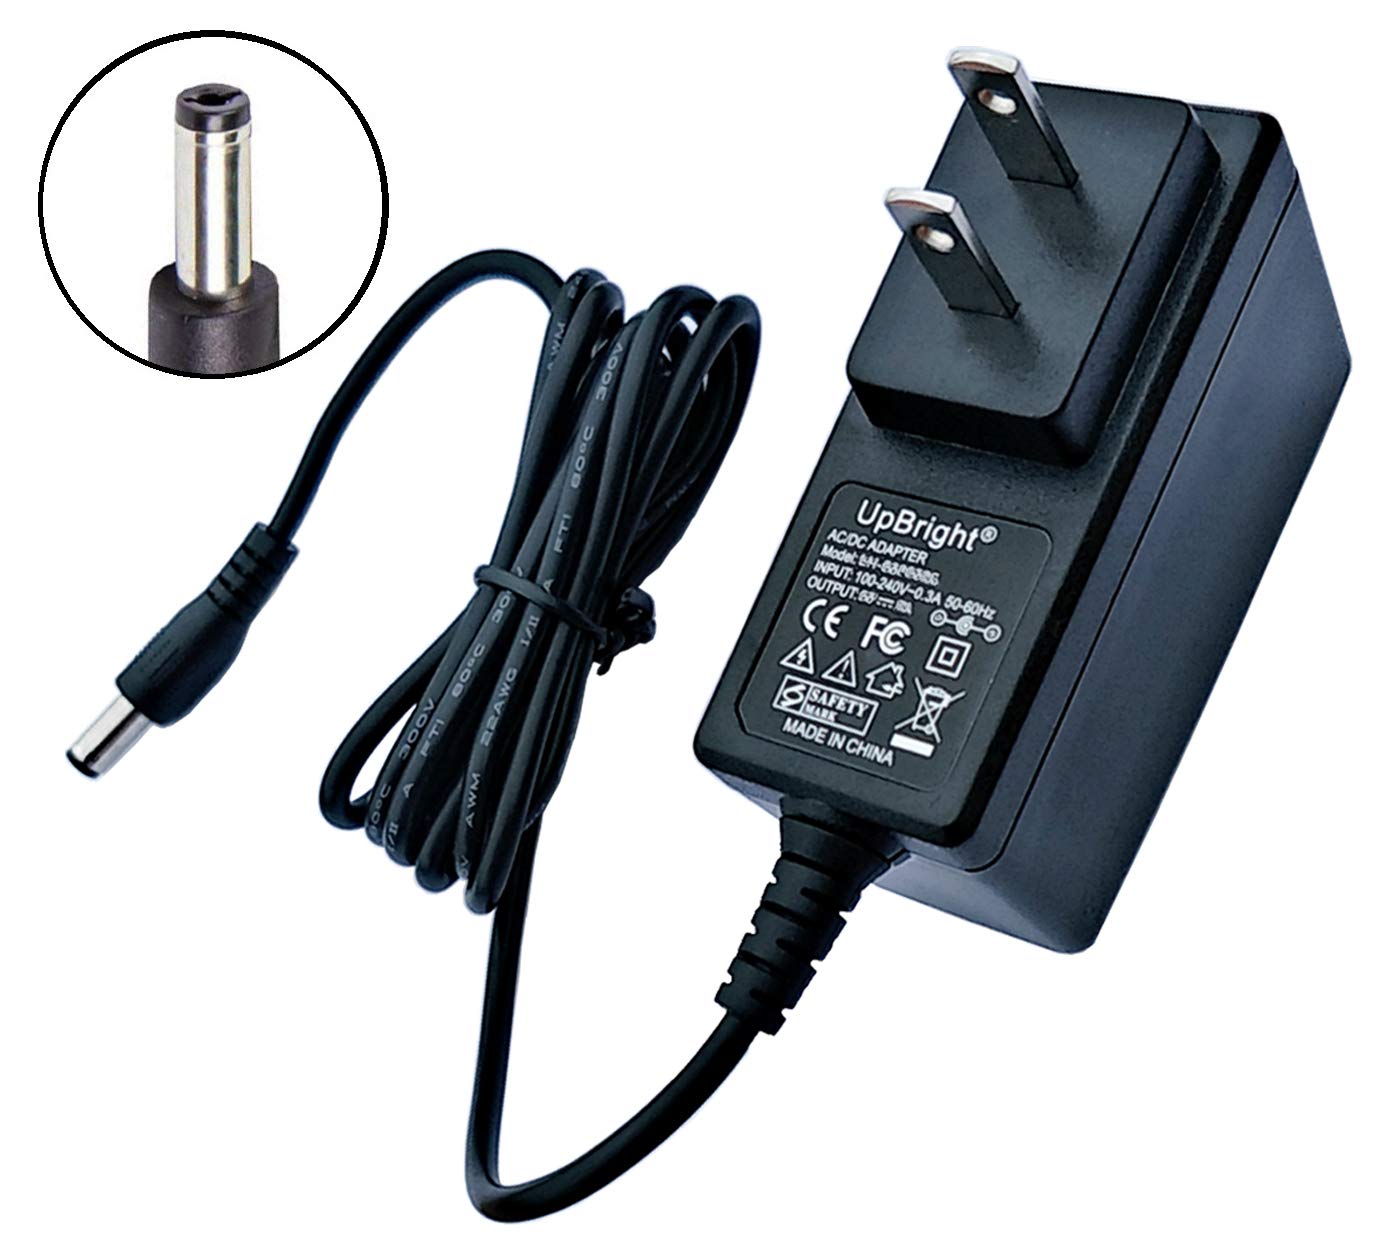 UpBright 19V AC/DC Adapter Compatible with Shark ION Robot 750 Series RV750N RV750_N RV750 40 14.8V Floor Sweeper Robotic Vacuum Cleaner 19VDC Power Supply Battery Charger (No Charging Dock Station)